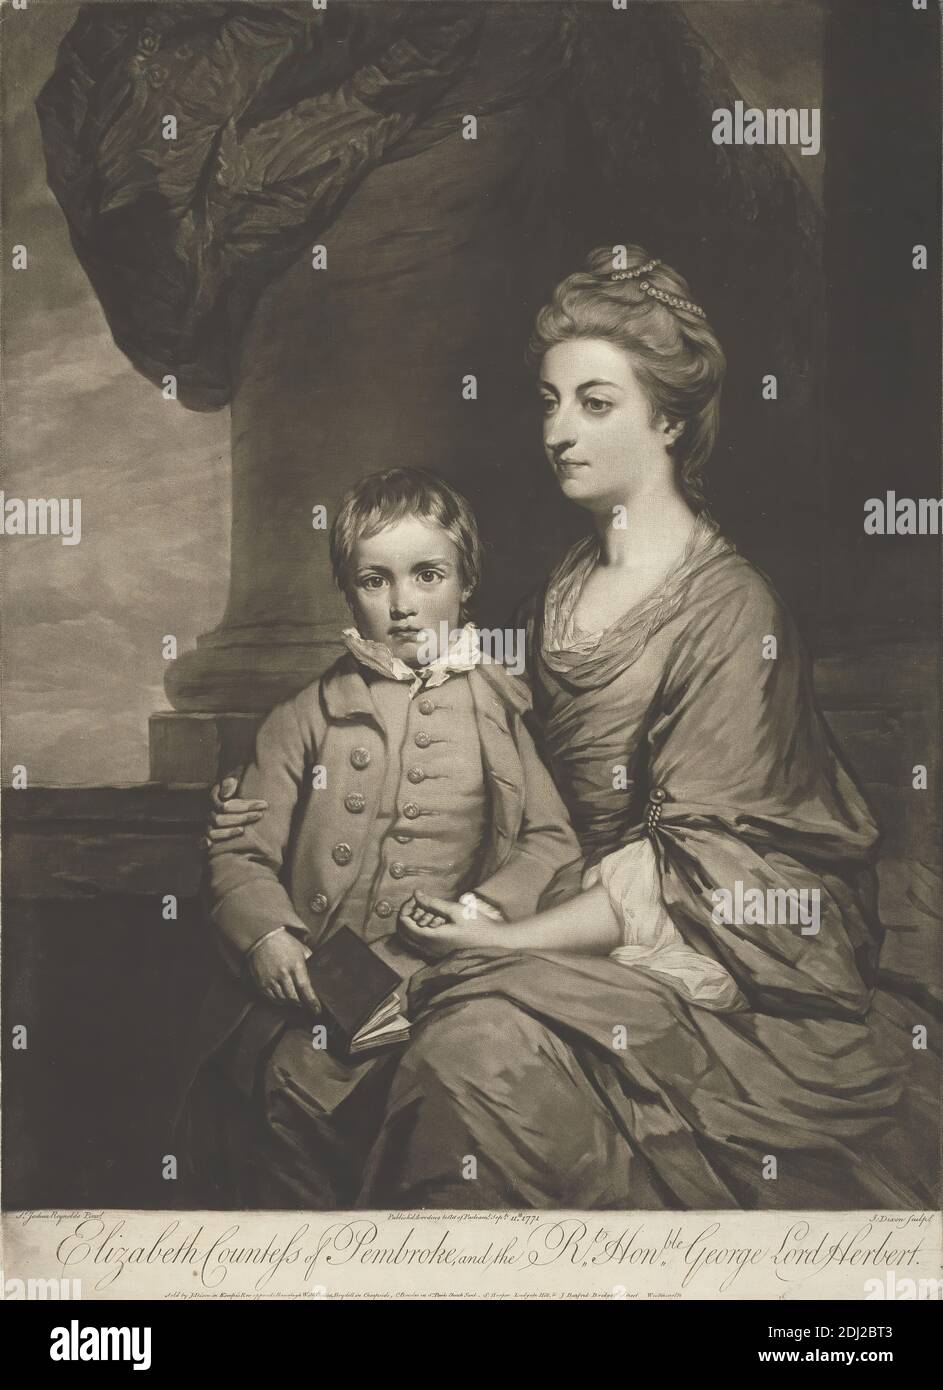 Elizabeth, Countess of Pembroke, and the Rt. Honble. George, Lord Herbert, Print made by John Dixon, ca. 1740–1811, Irish, after Sir Joshua Reynolds RA, 1723–1792, British, Published by John Dixon, ca. 1740–1811, Irish, Published by Josiah Boydell, 1752–1817, British, Published by Carington Bowles, 1724–1793, British, Published by Thomas Burford, ca. 1710–after 1774, British, Published by S. Hooper, active 1766–1788, British, 1771, Mezzotint on moderately thick, slightly textured, beige laid paper, Sheet: 17 15/16 x 13 inches (45.6 x 33 cm) and Image: 16 5/8 x 12 7/8 inches (42.2 x 32.7 cm Stock Photo